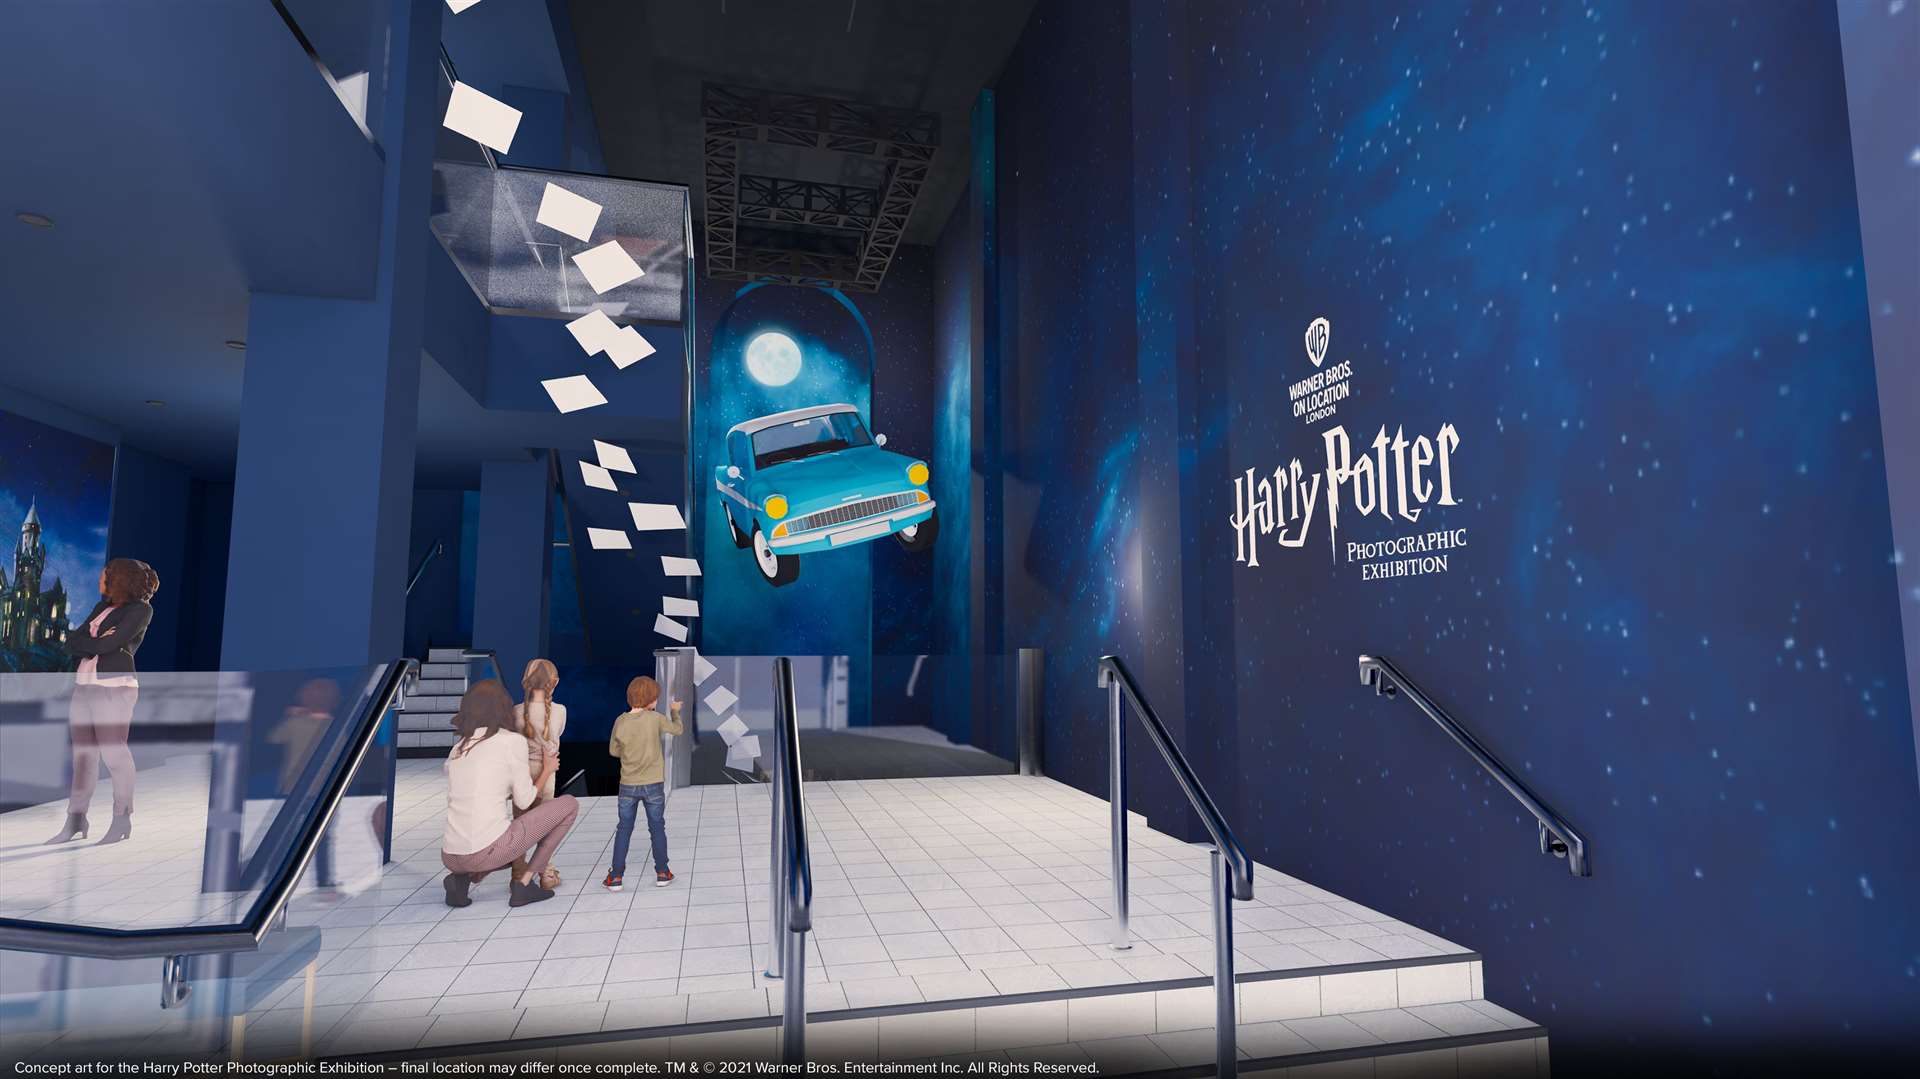 A new Harry Potter exhibition opens in London next month. Credit: The Harry Potter Photographic Exhibition